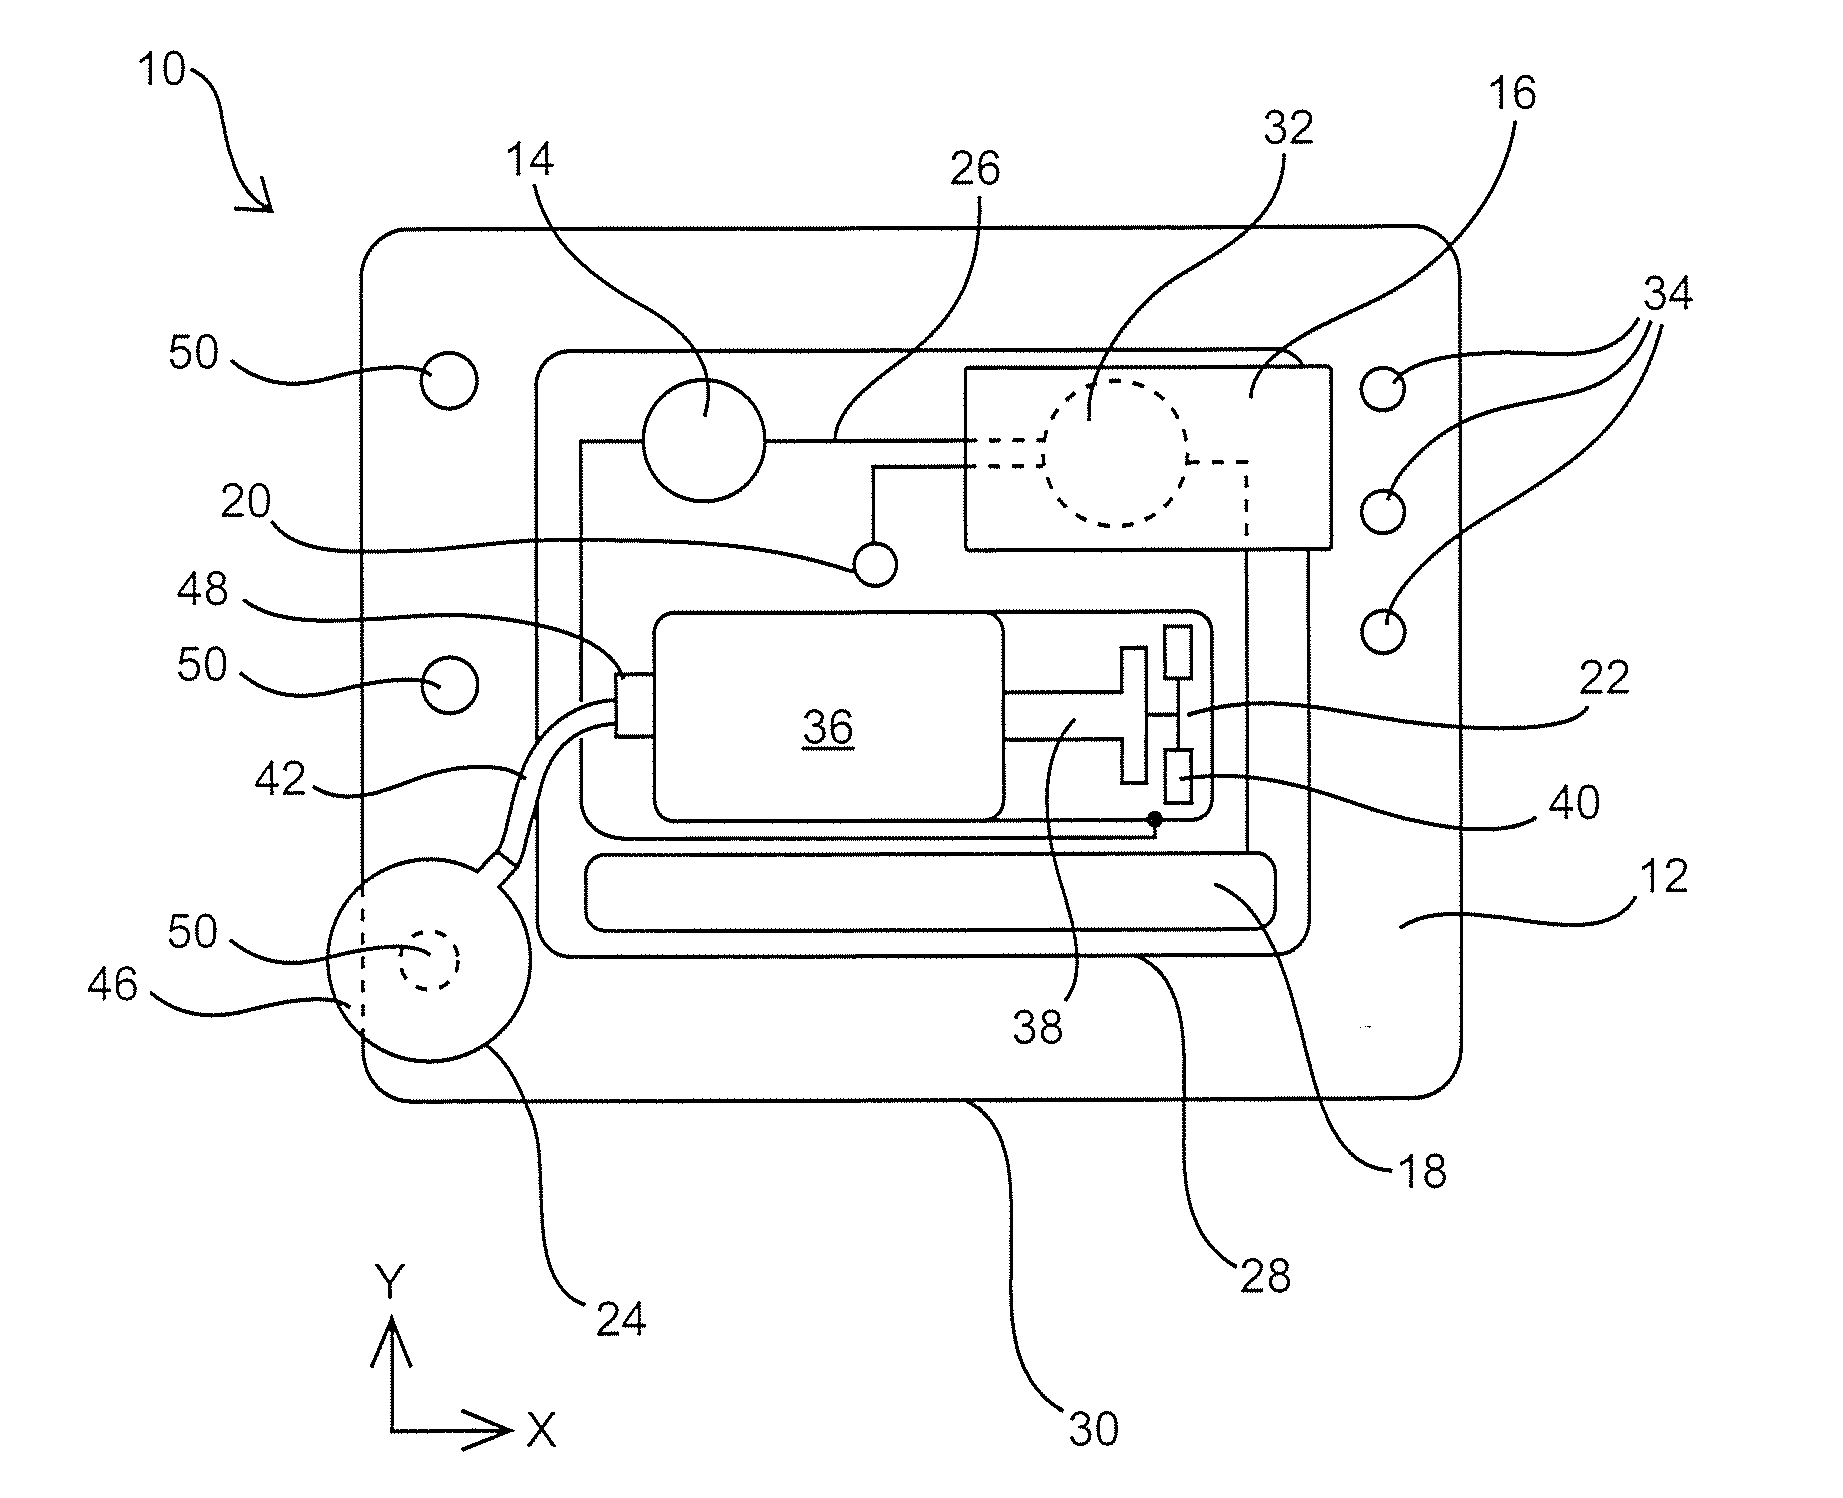 Flexible patch for fluid delivery and monitoring body analytes